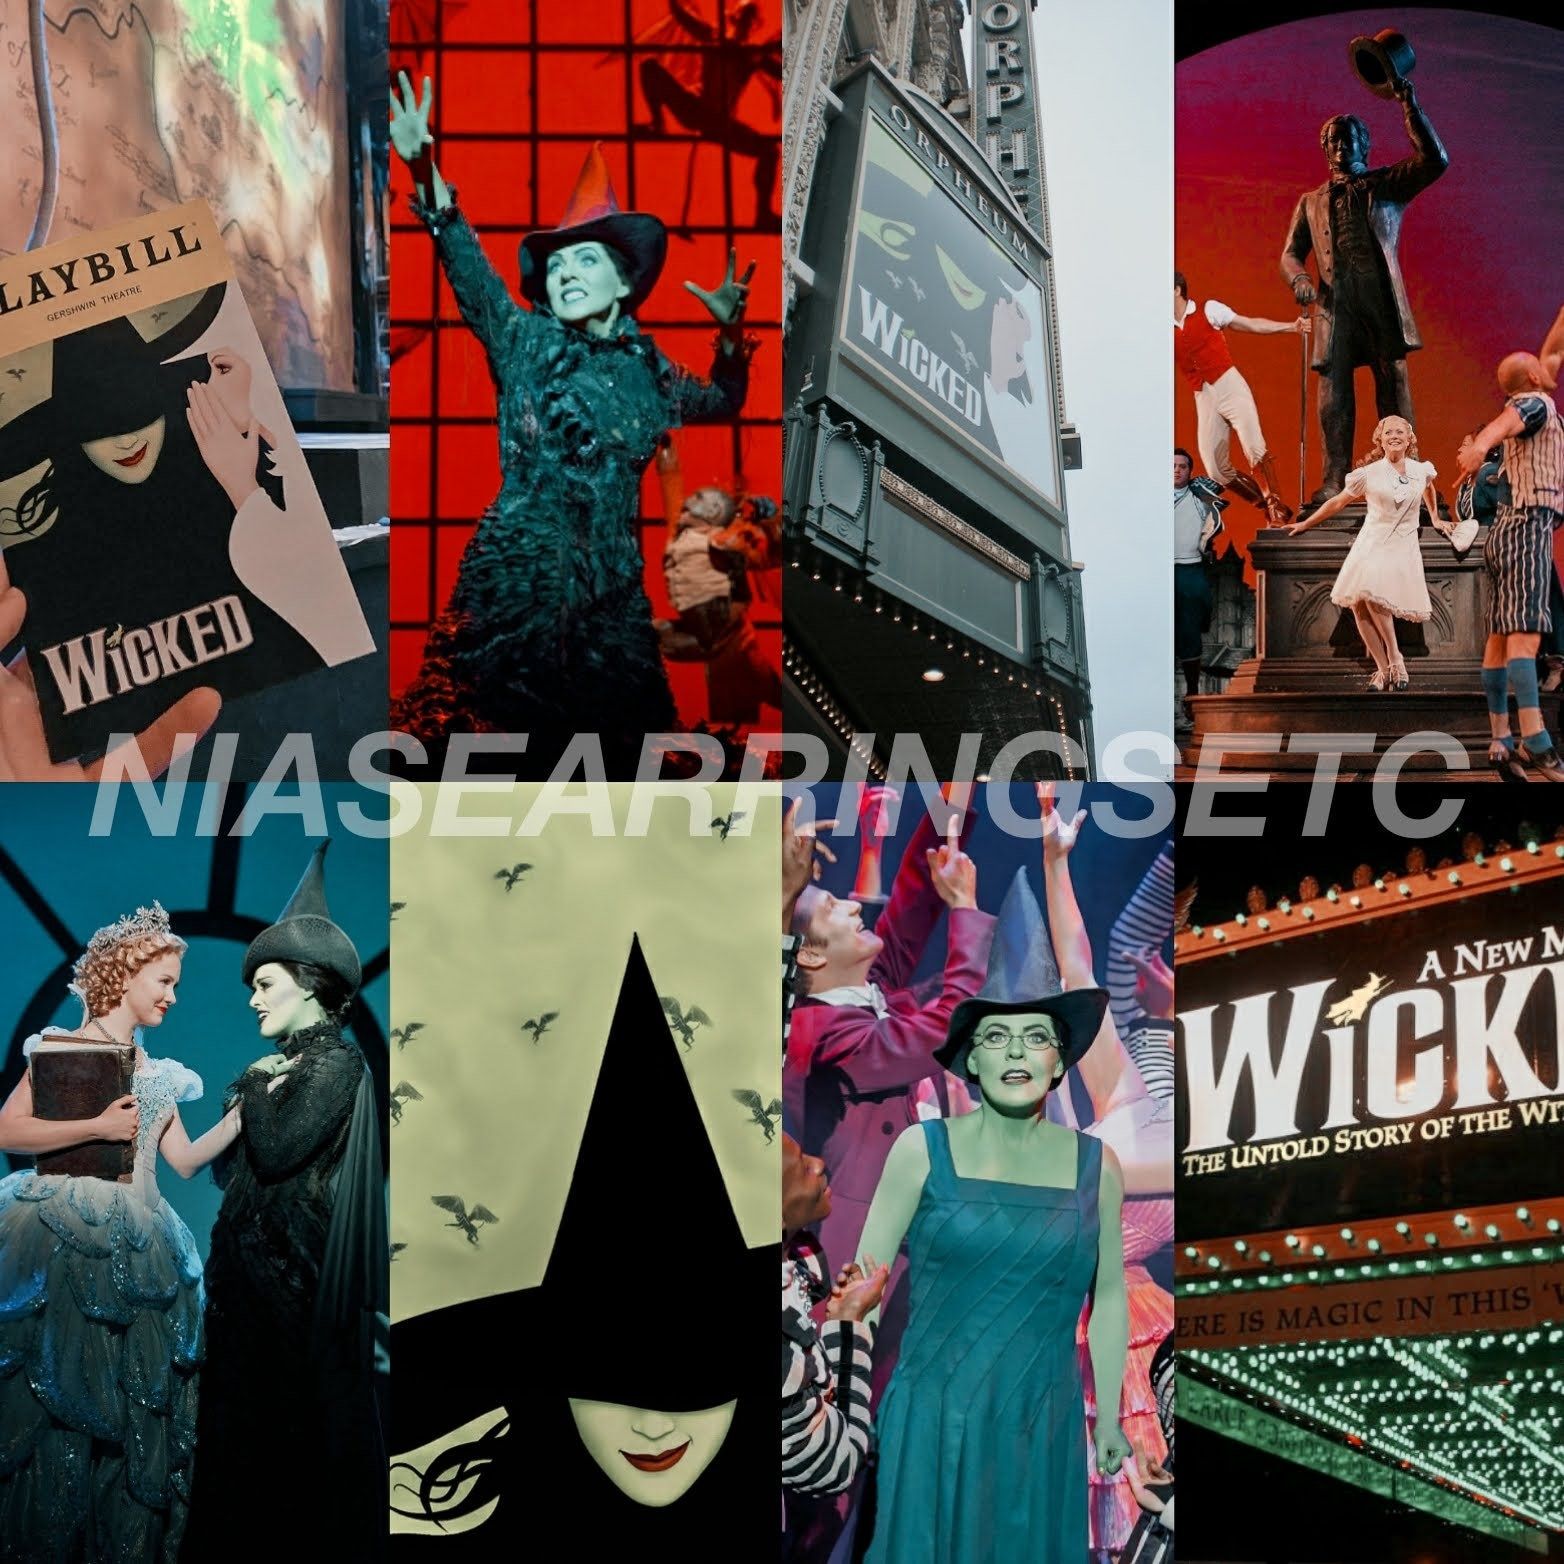 Collage of images from the Broadway musical Wicked, including the Gershwin Theatre and the cast. - Broadway